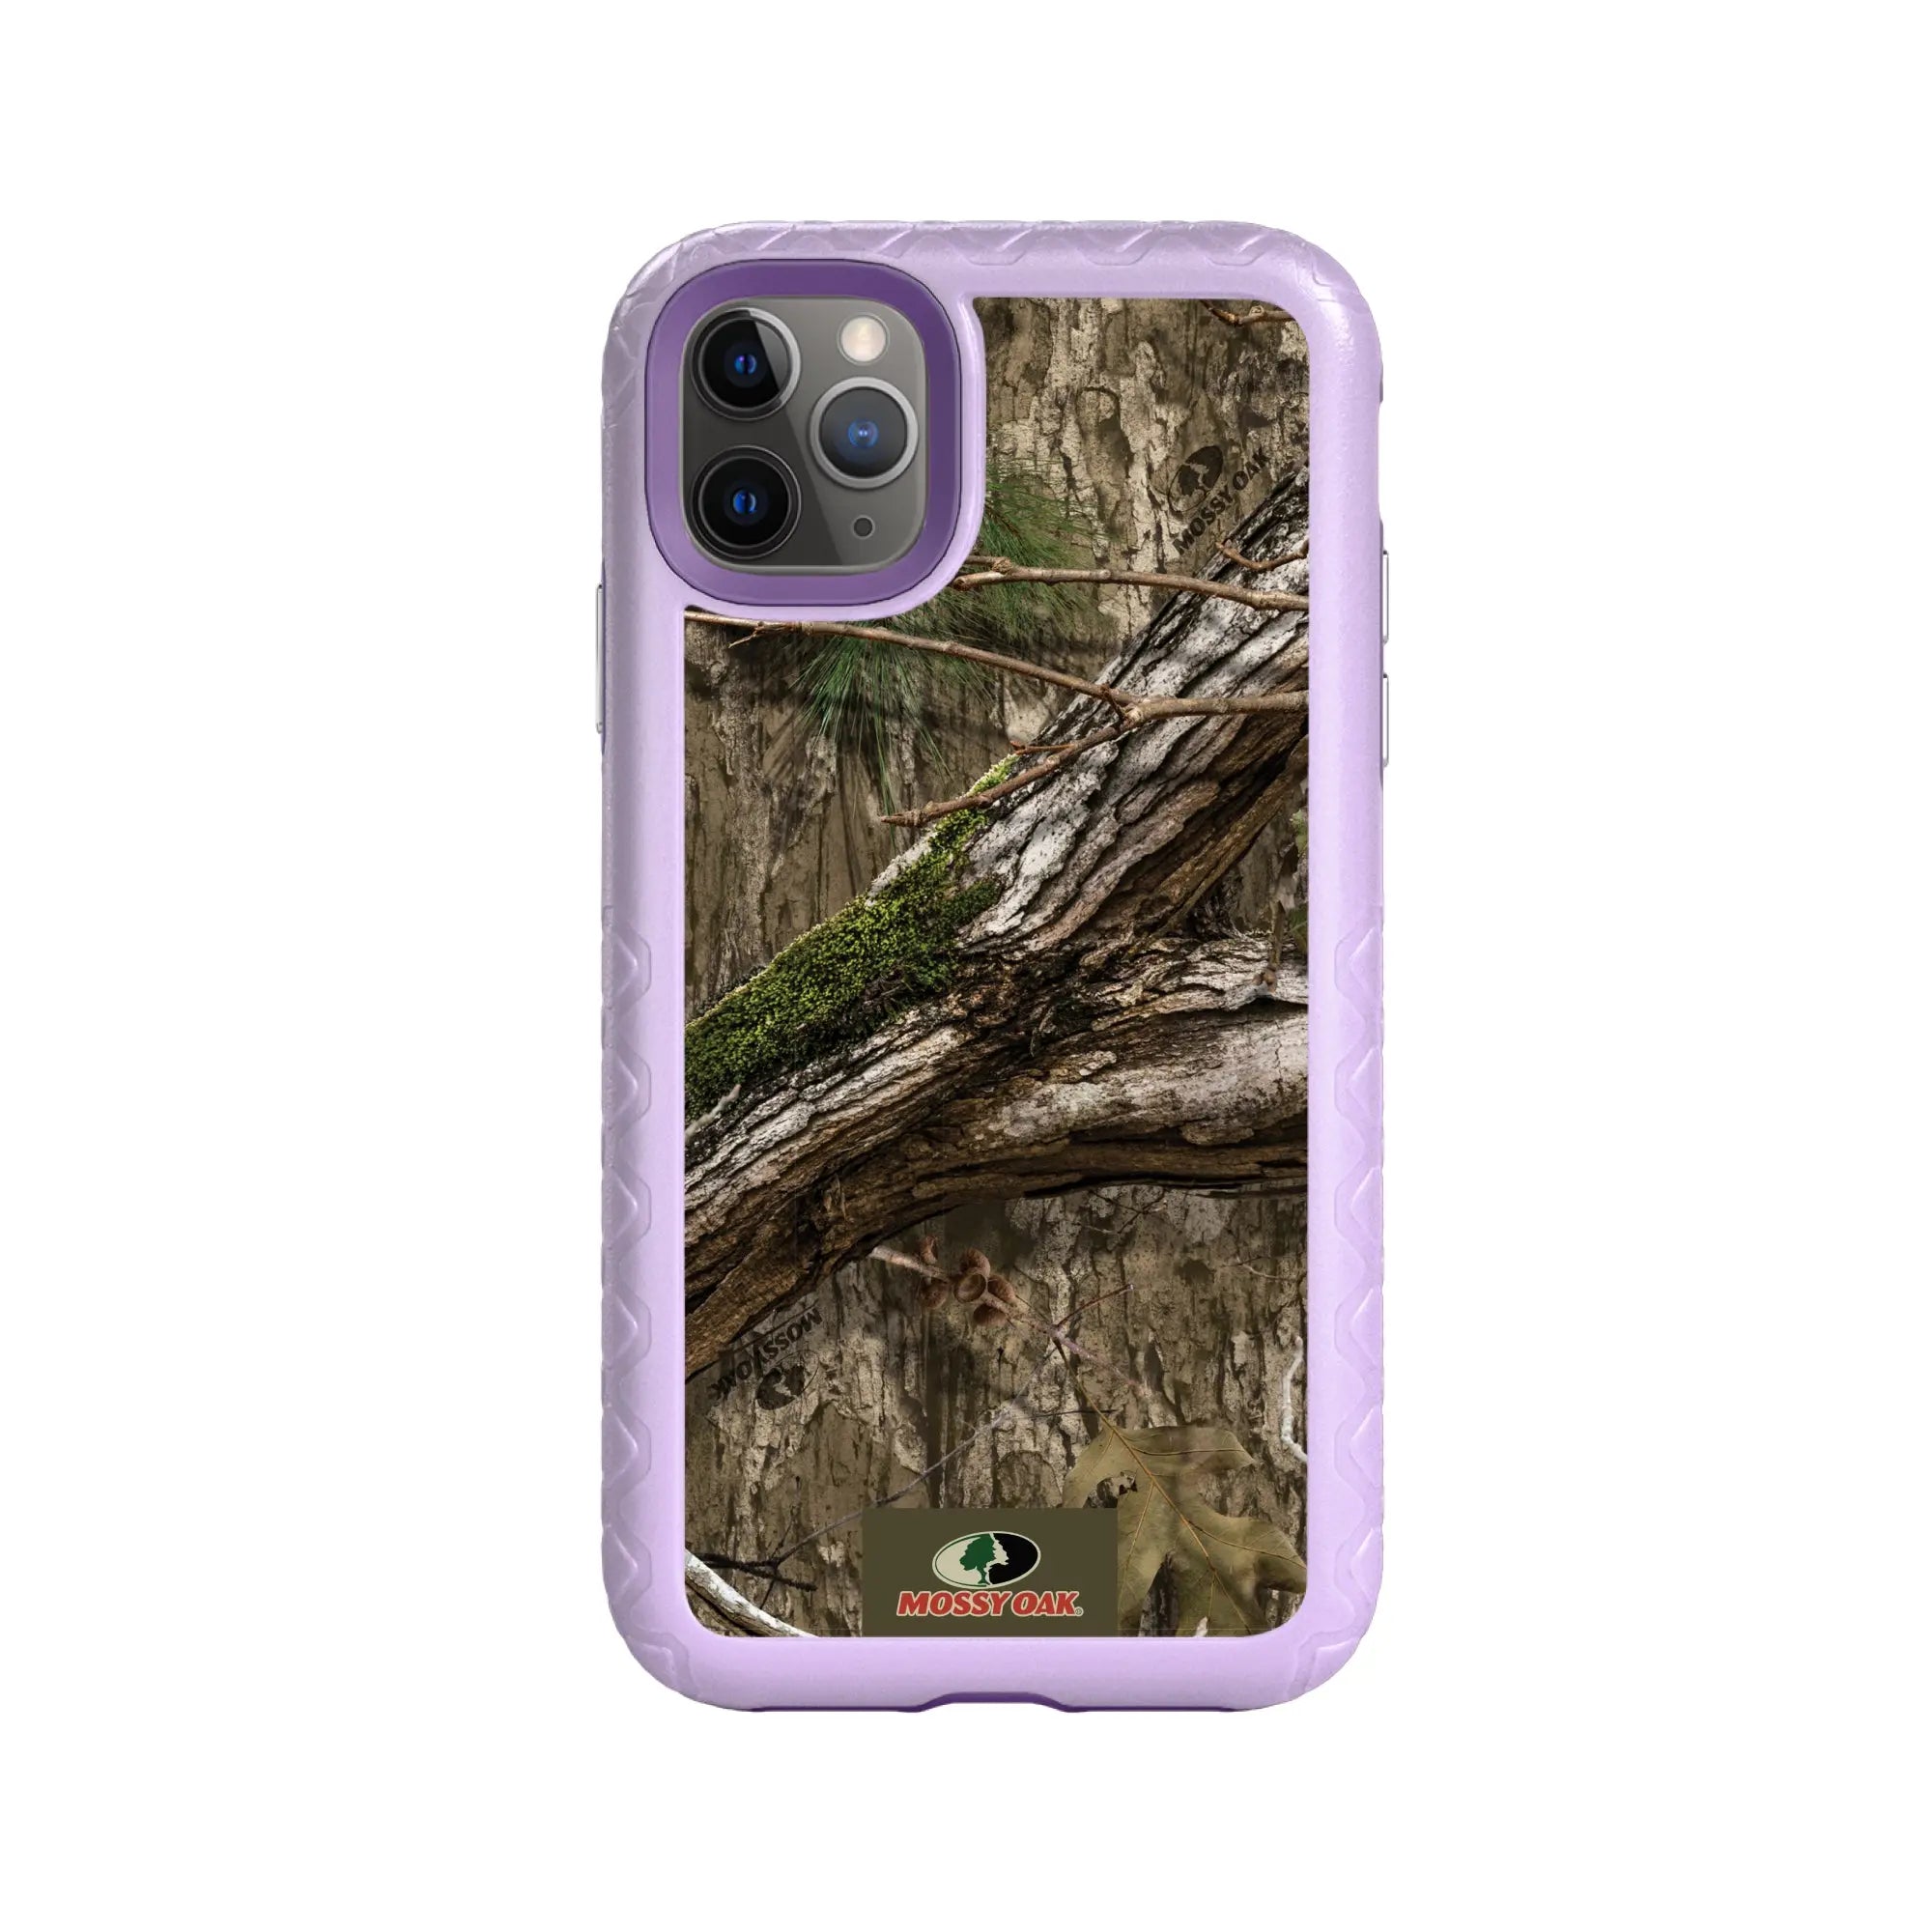 Mossy Oak Fortitude Series for Apple iPhone 11 Pro Max - Country DNA - Custom Case - LilacBlossomPurple - cellhelmet